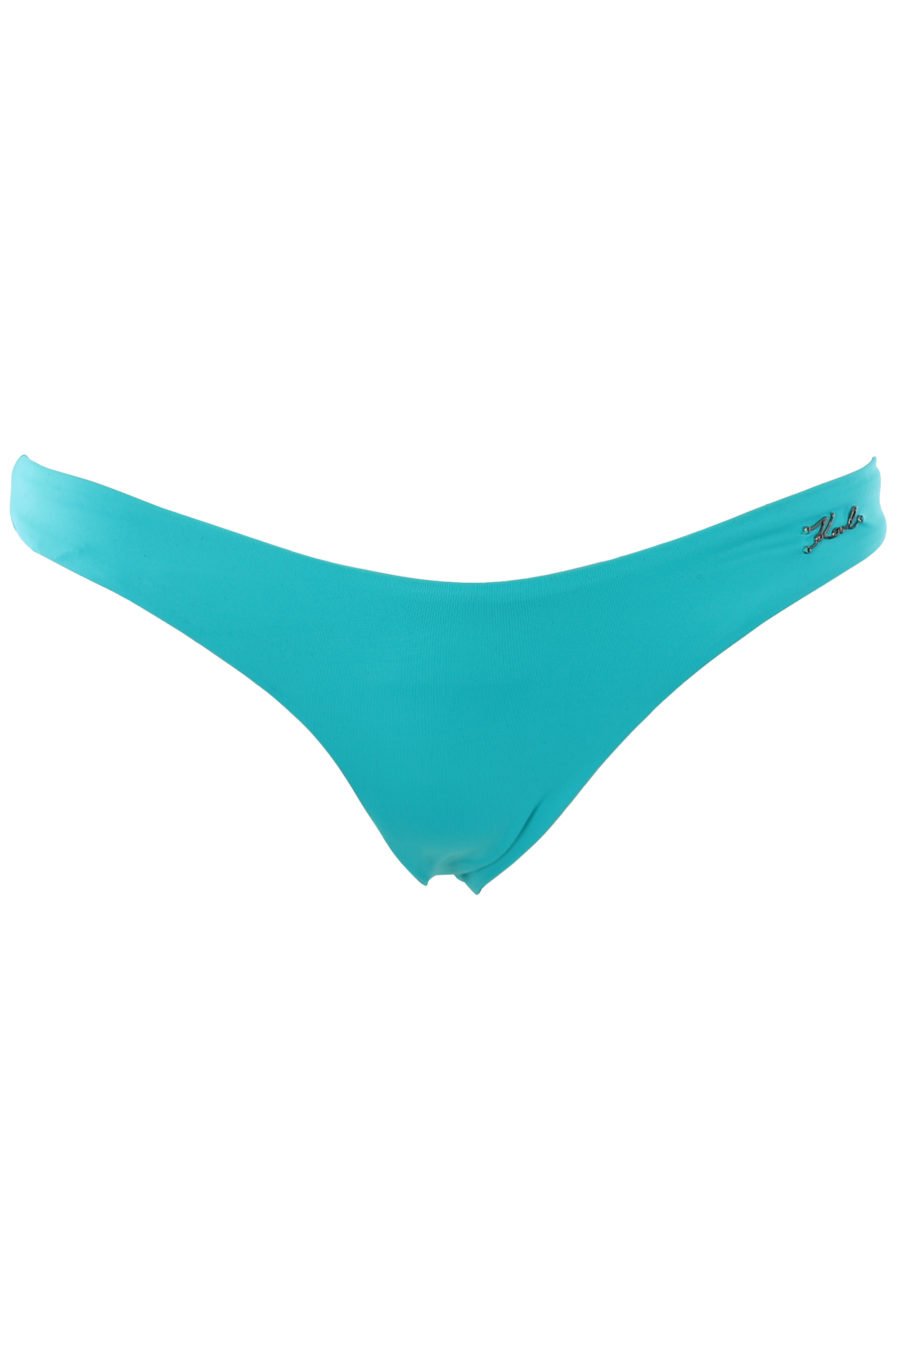 Turquoise blue swimming costume with small metal lettering logo - IMG 1310